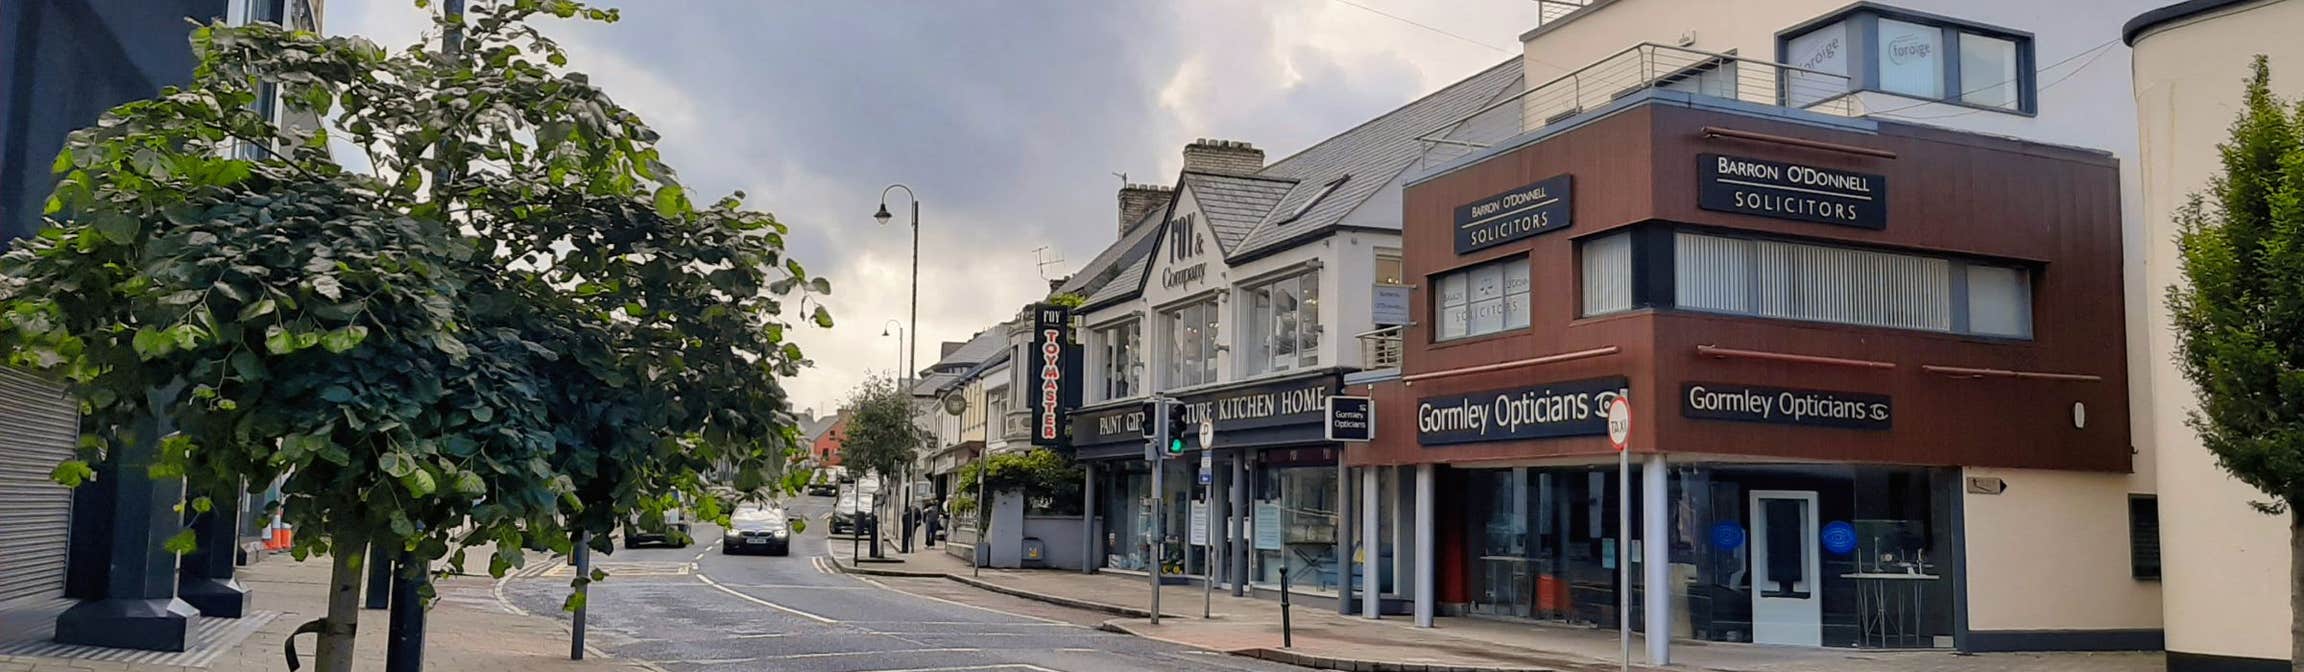 Image of Ballybofey town in County Donegal